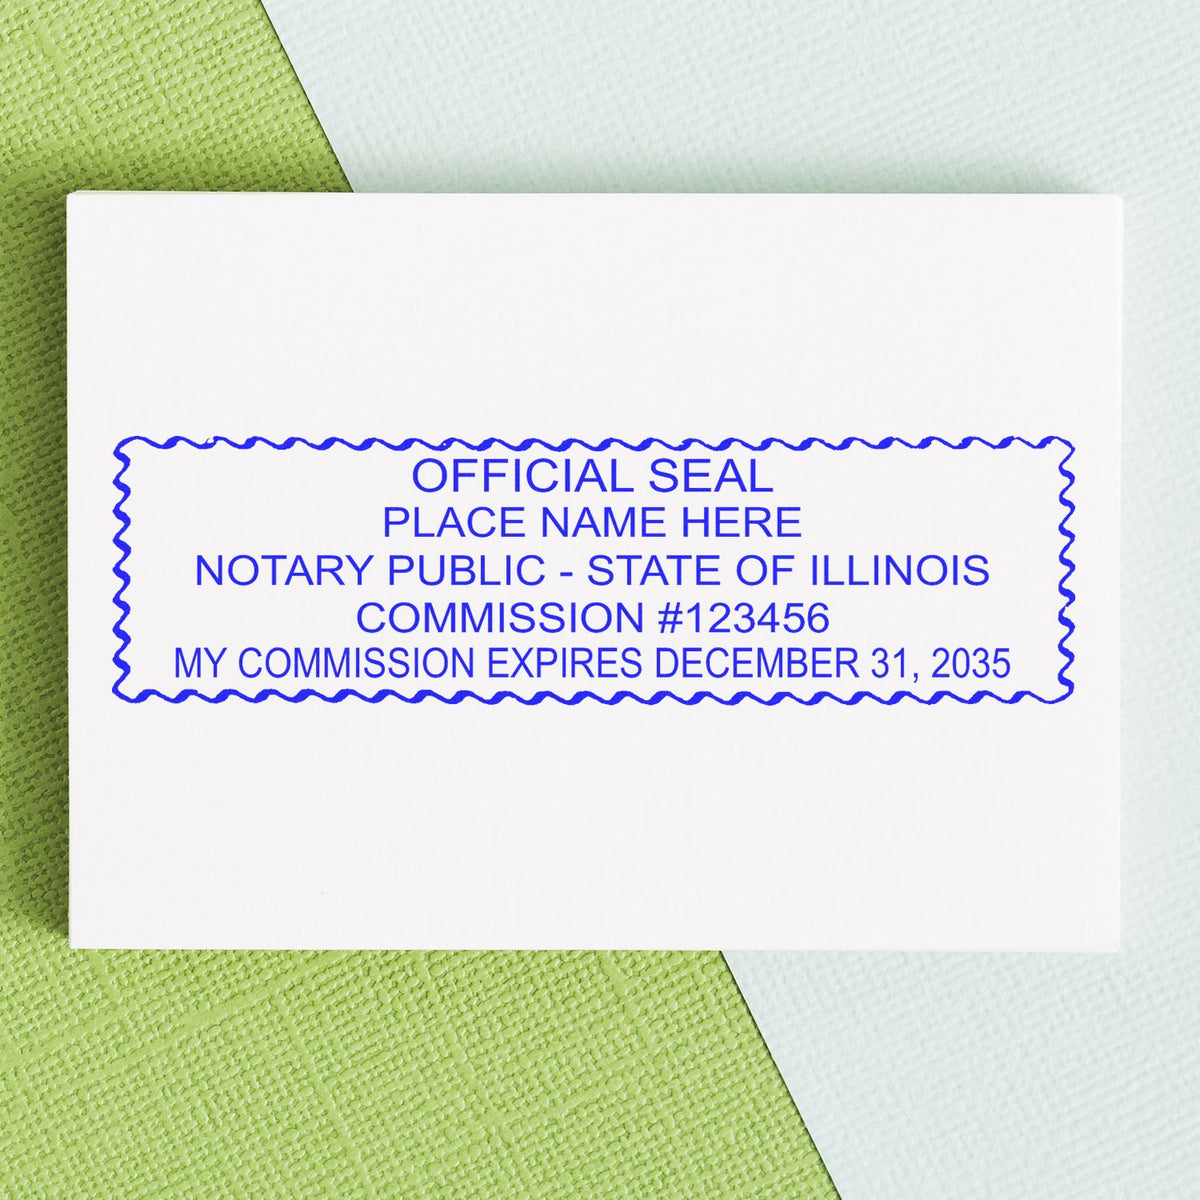 The MaxLight Premium Pre-Inked Illinois Rectangular Notarial Stamp stamp impression comes to life with a crisp, detailed photo on paper - showcasing true professional quality.